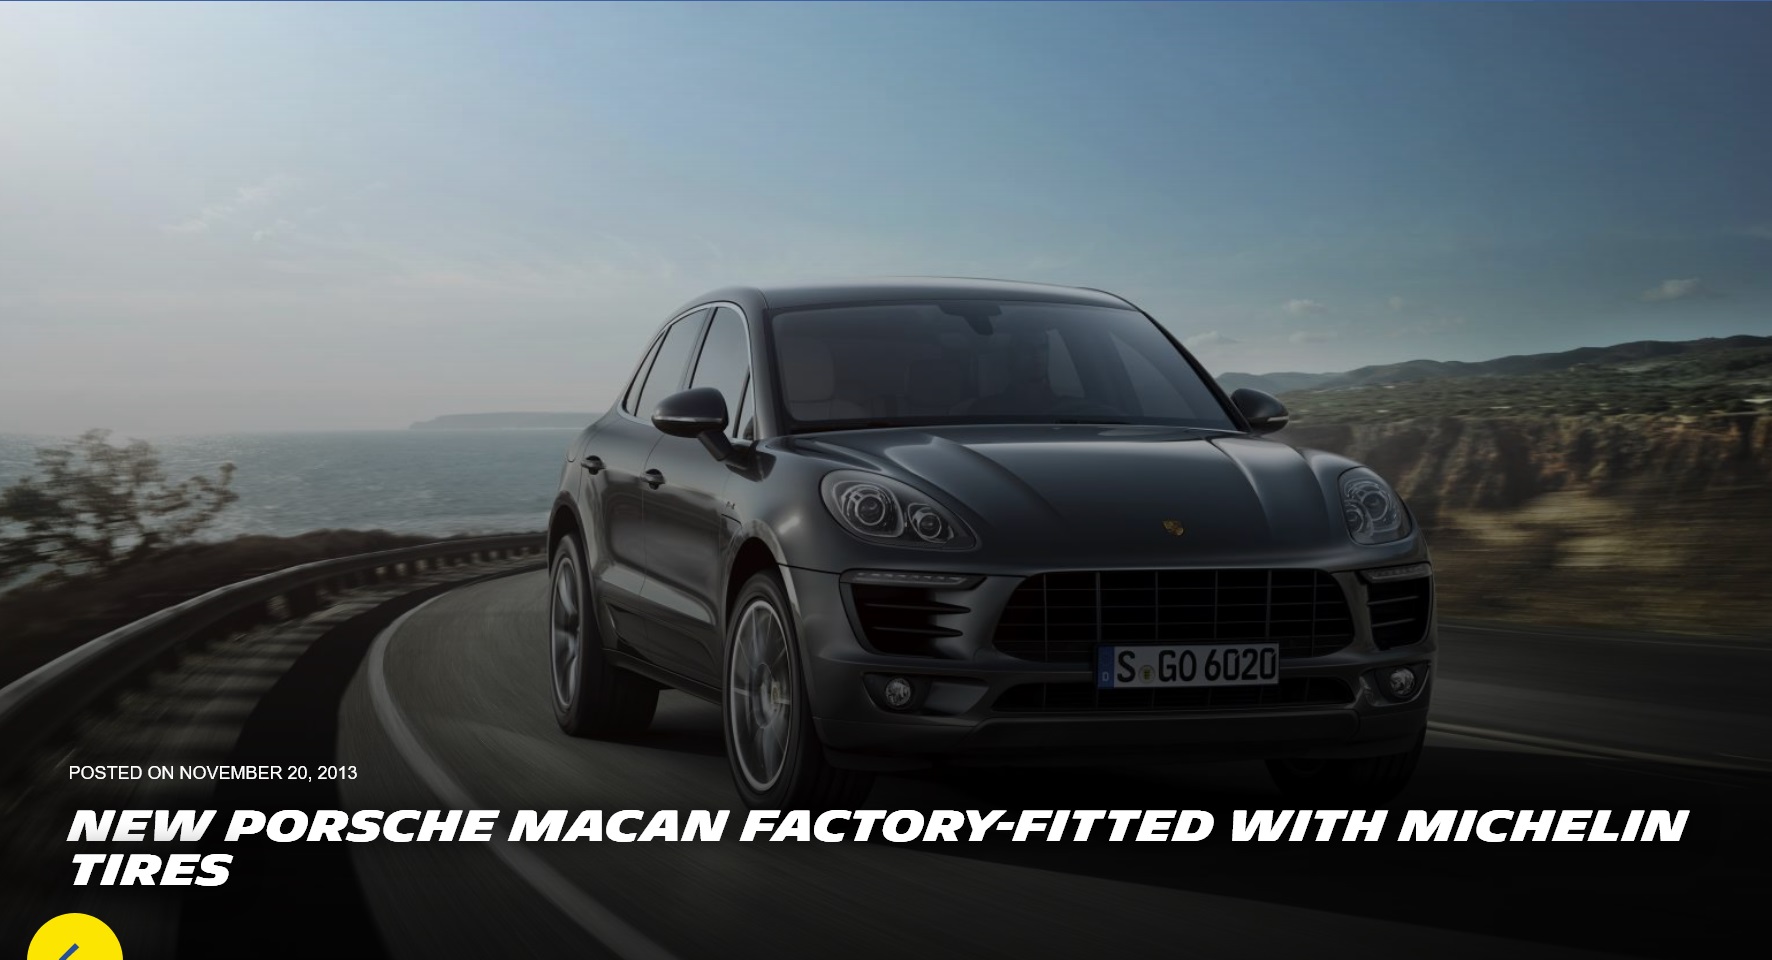 Screenshot 2022-08-19 at 12-18-05 New Porsche Macan Factory-Fitted With Michelin Tires Michelin North America Inc.jpg